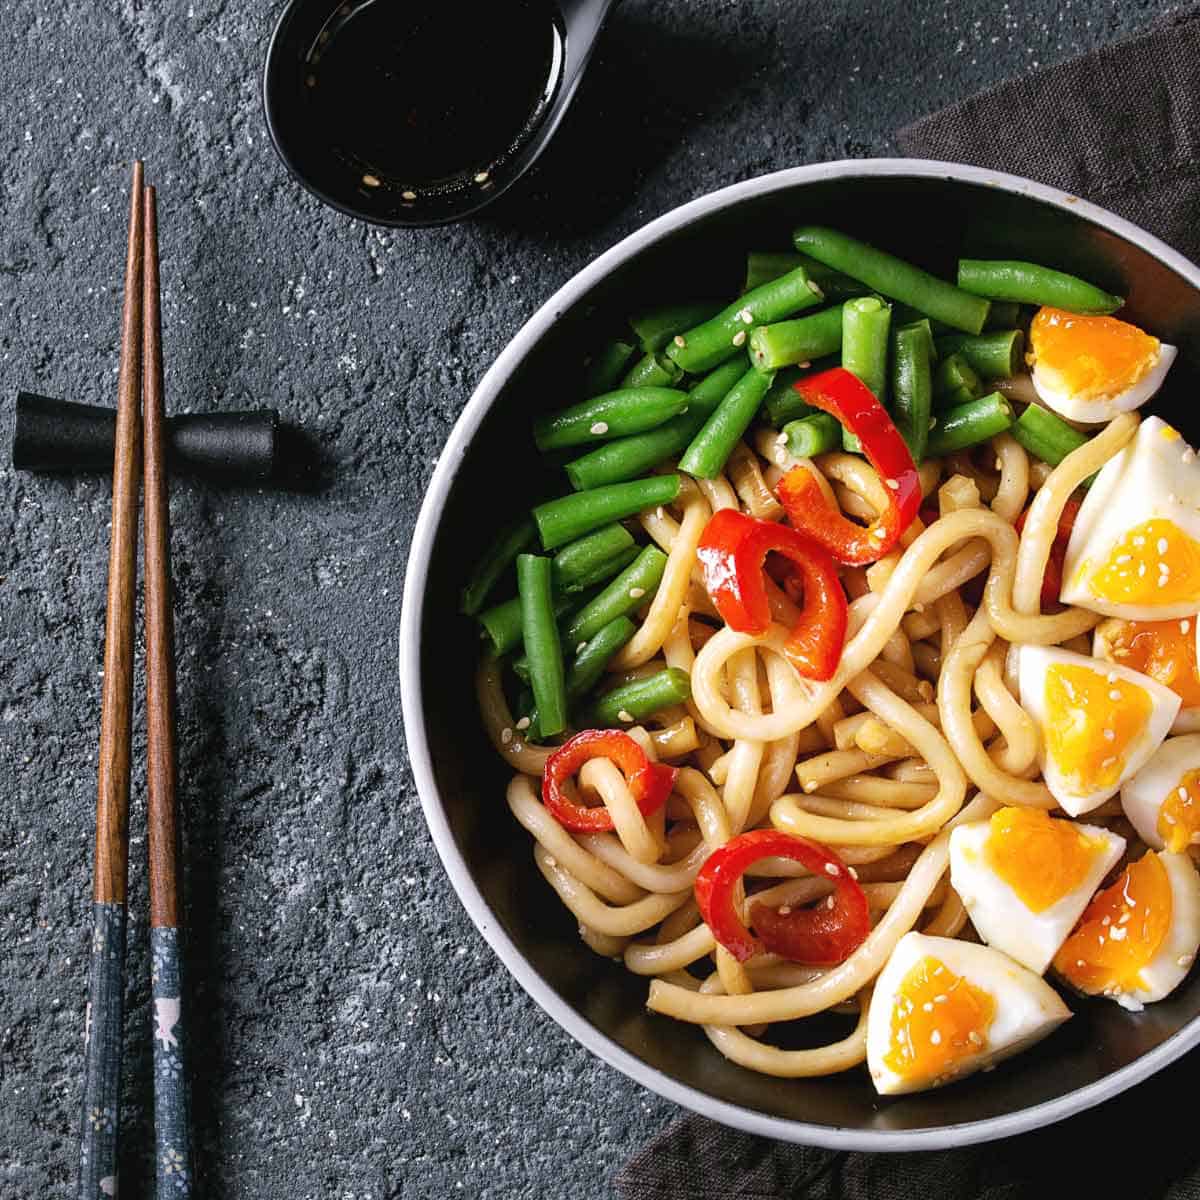 Udon with sliced green beans and hard boiled egg in a black bowl with chopstick on the side.